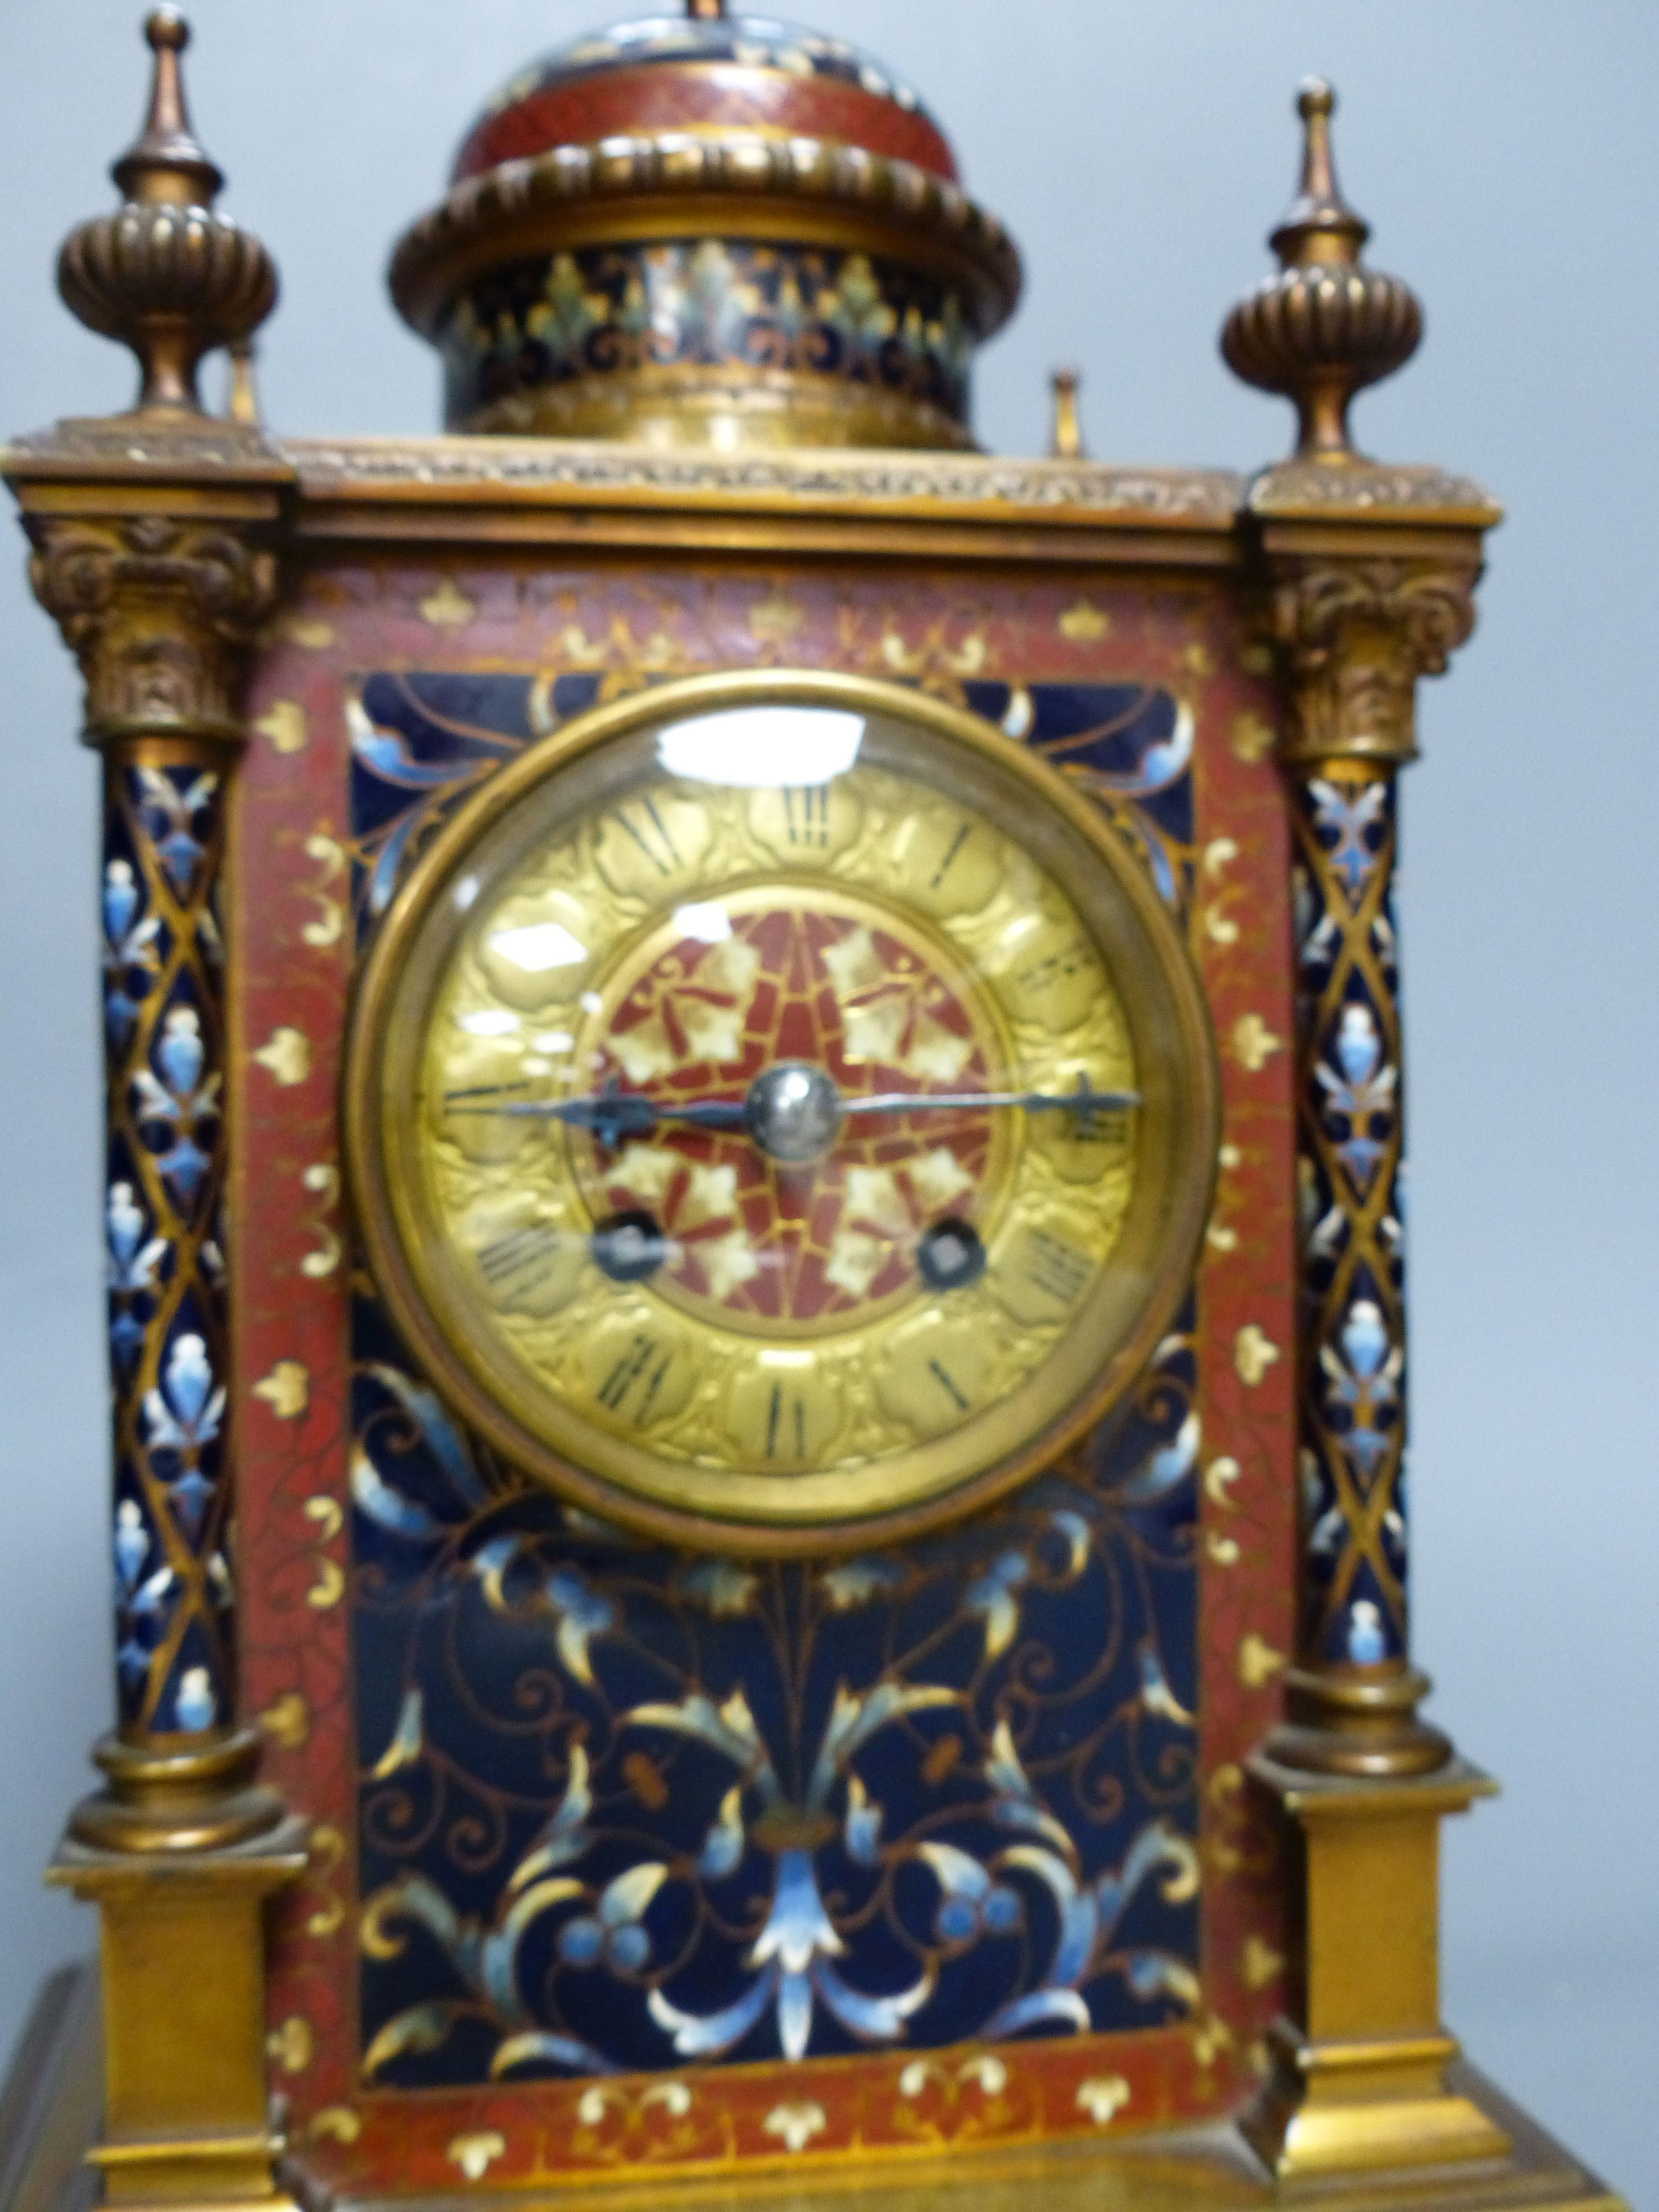 A 19th century champleve and gilt brass mantel clock, height 31cm